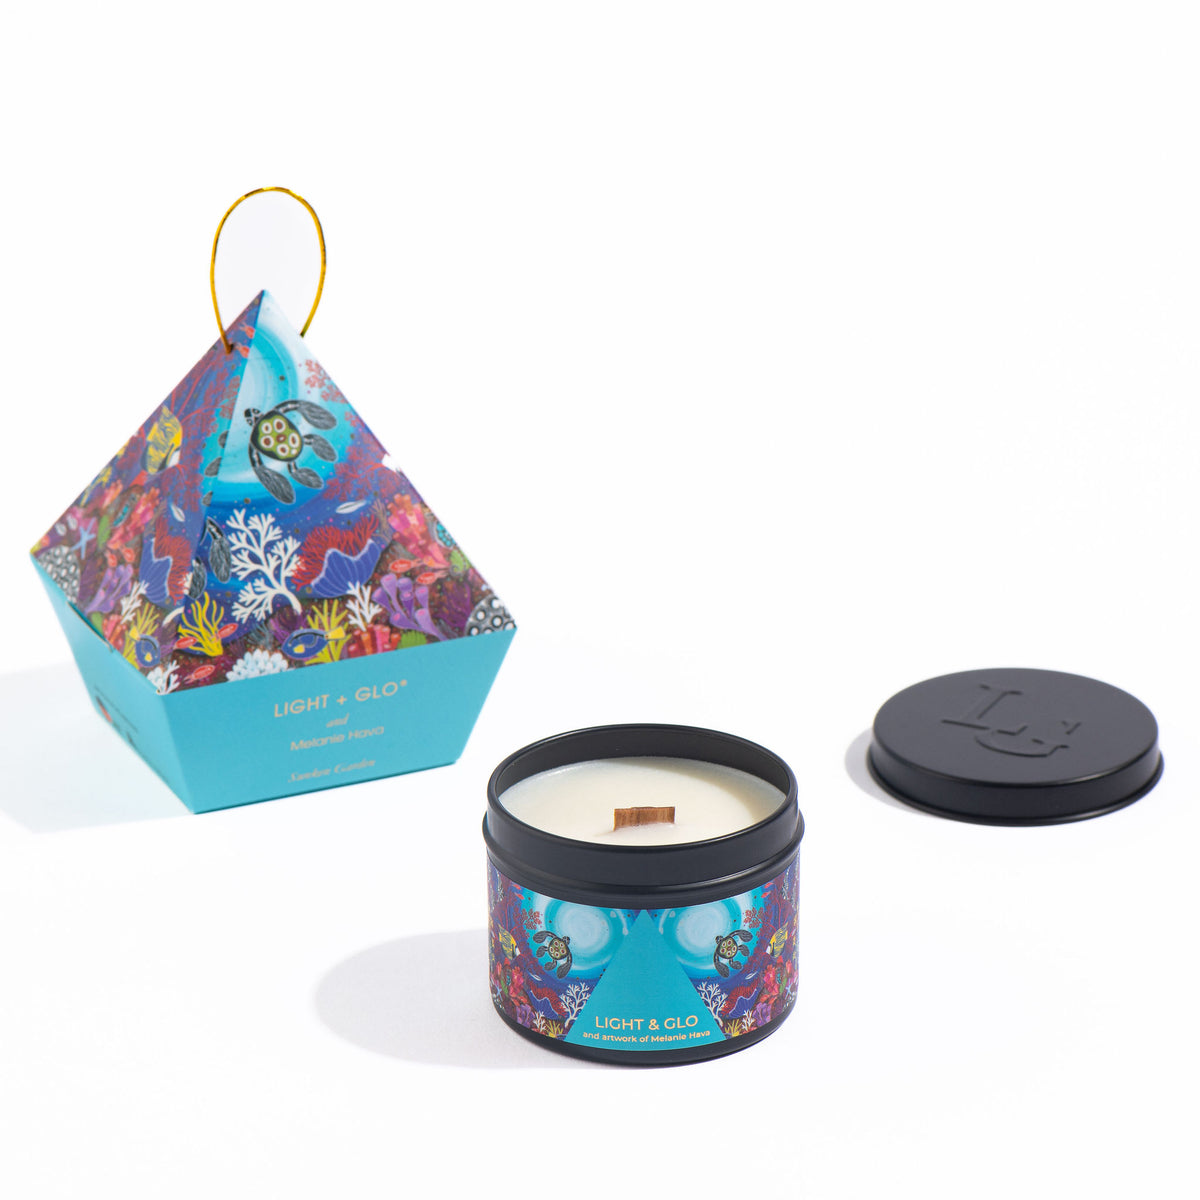 Soul Australiana Travel Candle - Sunken Garden Bauble Limited Edition Candle | Luxury Candles &amp; Home Fragrances by Light + Glo